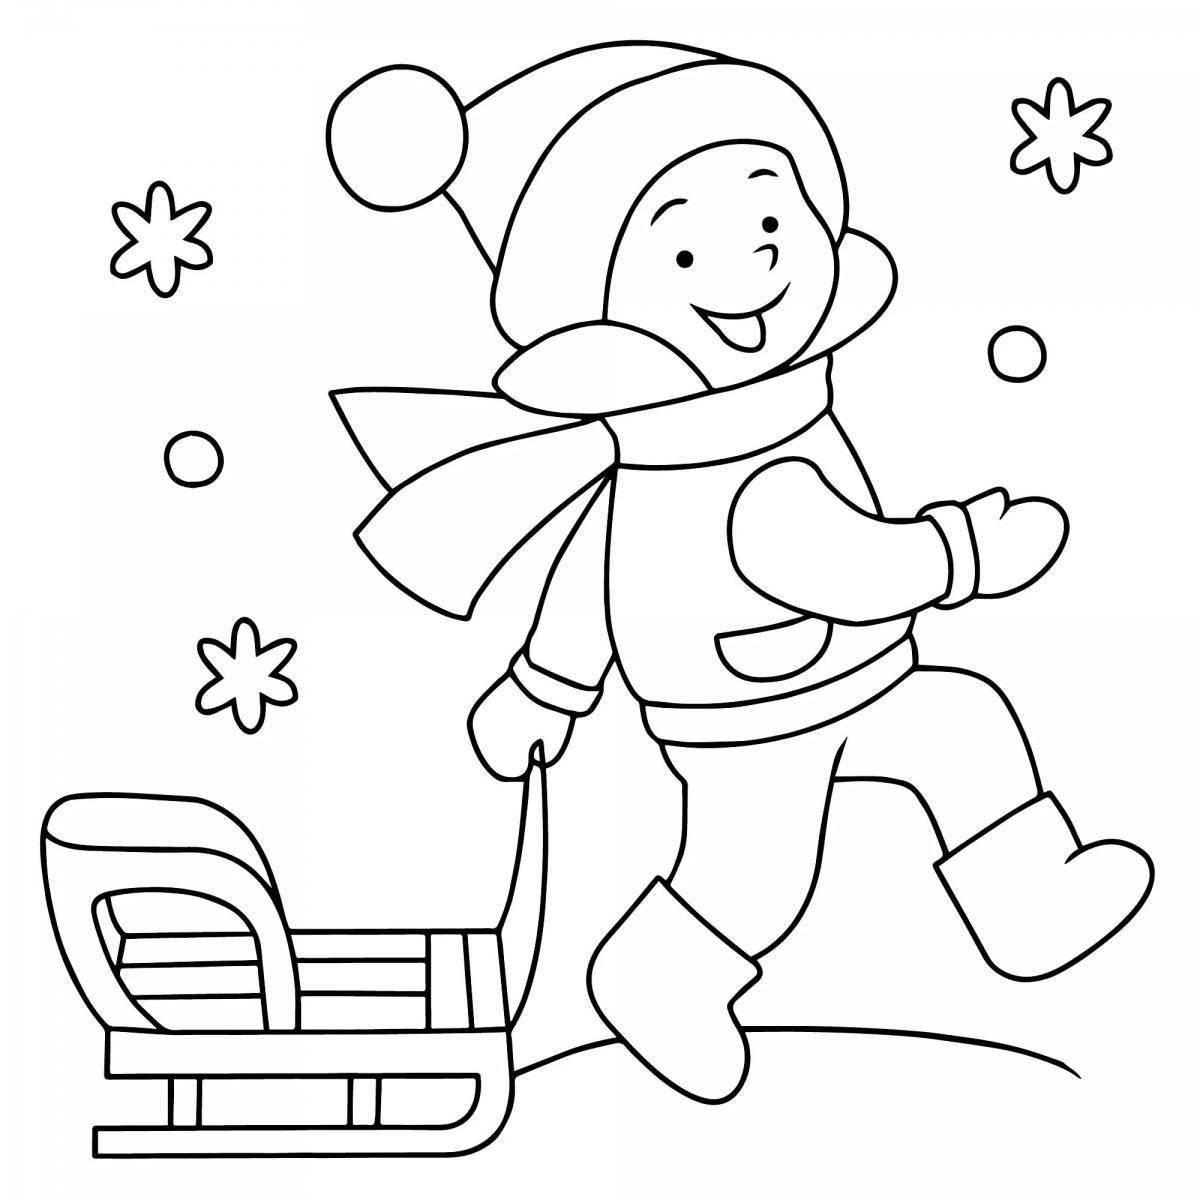 Bright coloring winter activities for children 5 years old